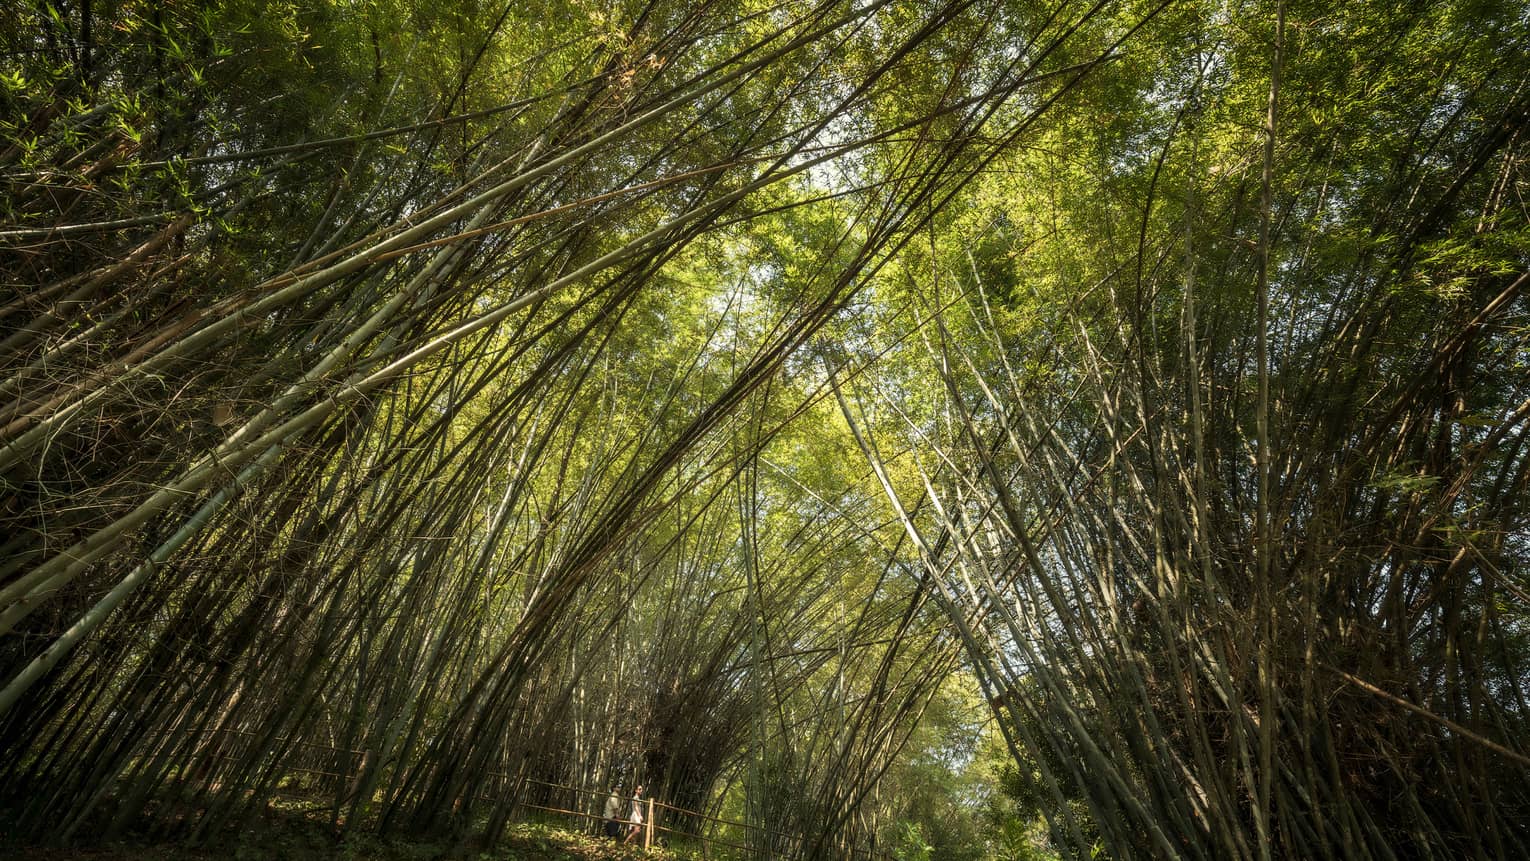 Two people walk under tall bamboo tree canopy in forest